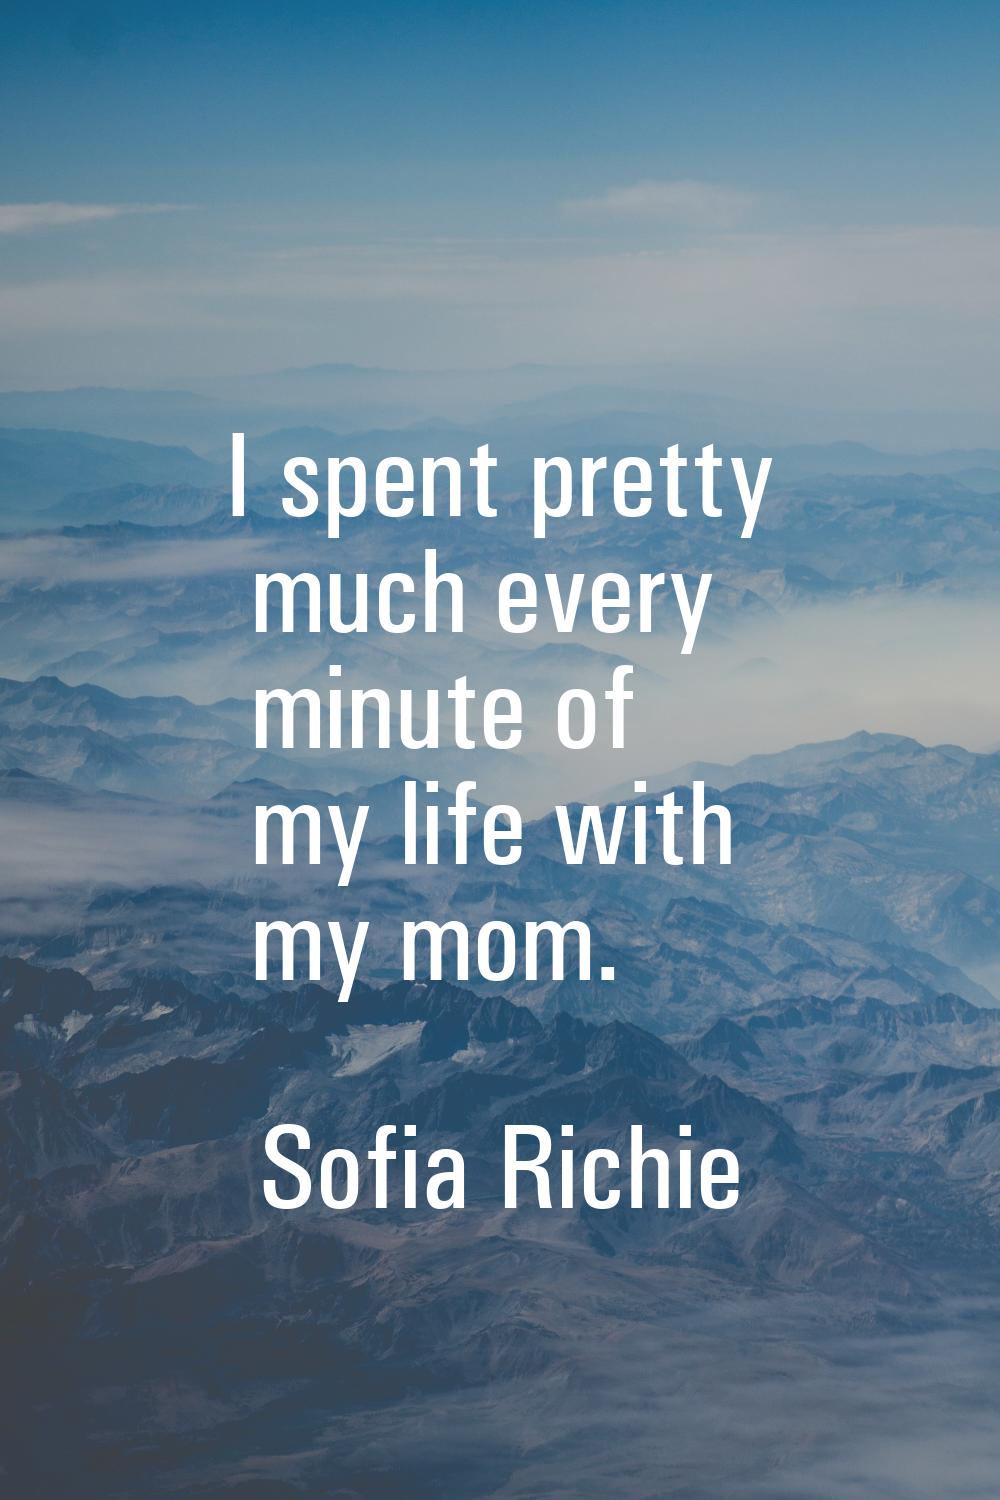 I spent pretty much every minute of my life with my mom.